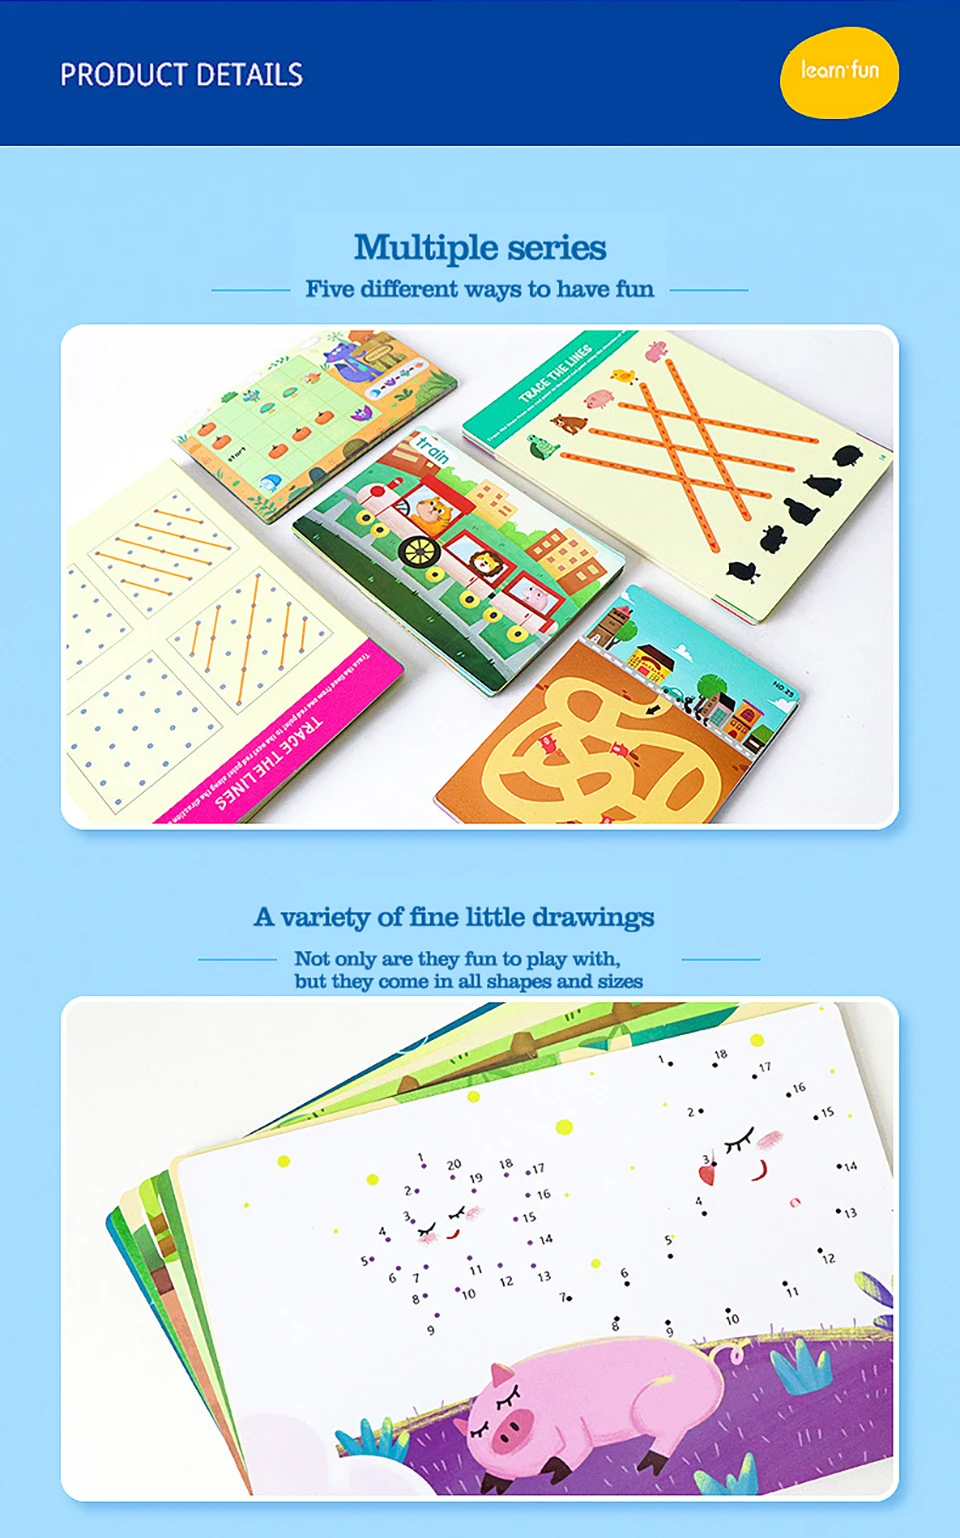 Montessori Children Toys Drawing Tablet DIY Color Shape Math Match Game Book Drawing Set  Learning Educational Toys For Children